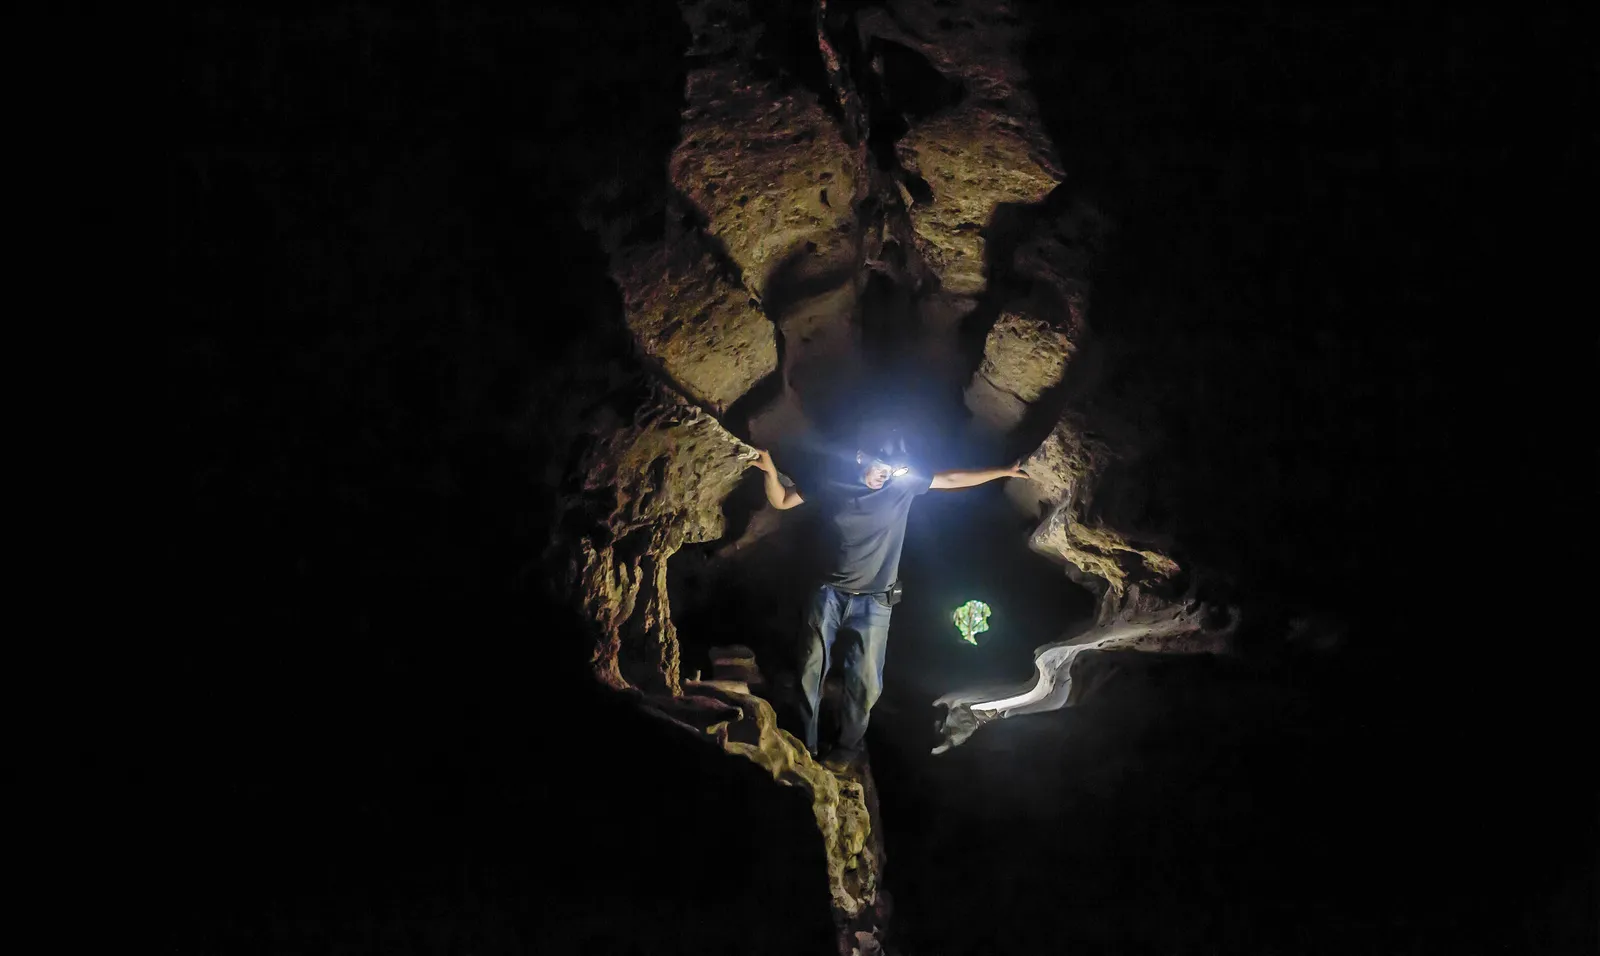 How torchlight, lamps and fire illuminated Stone Age cave art